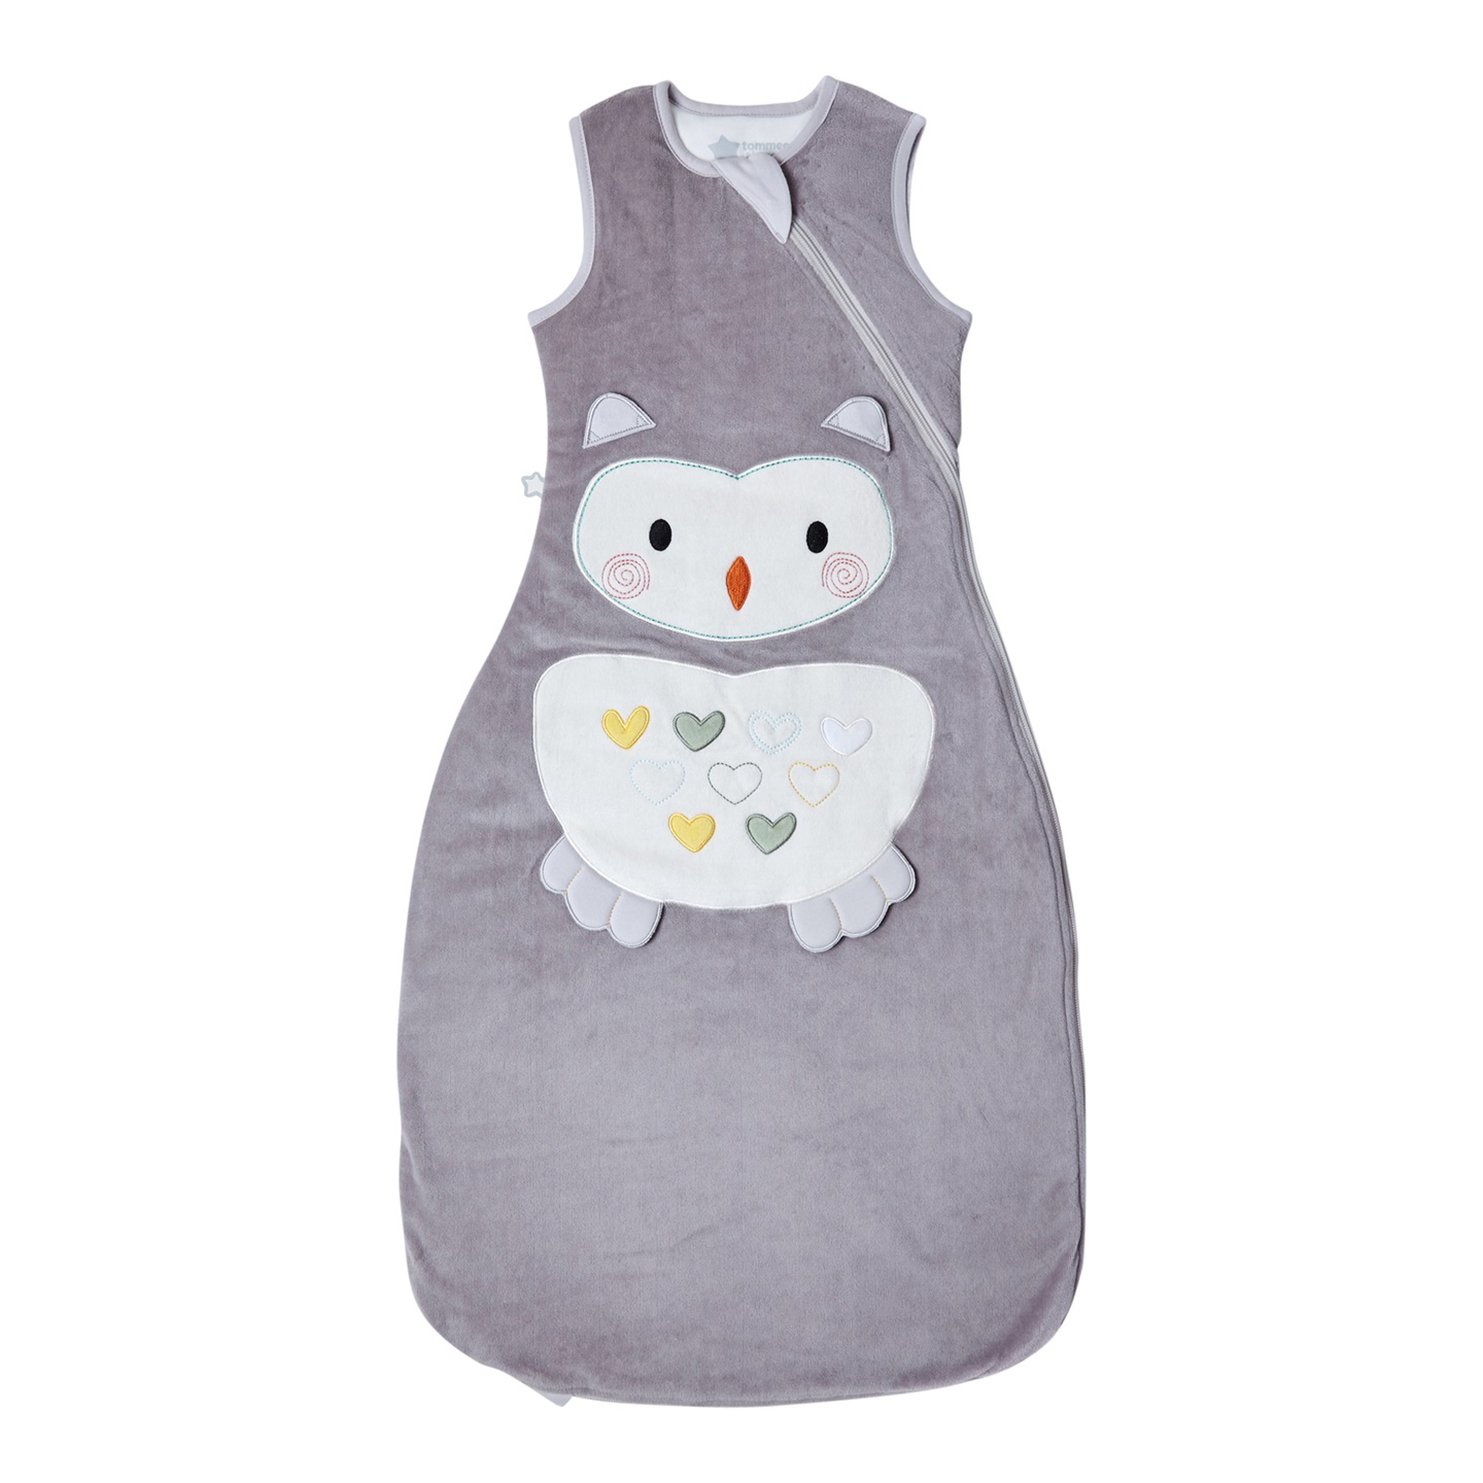 Tommee Tippee Baby Sleep Bag, 18-36m, 2.5 Tog, Ollie the Owl Review